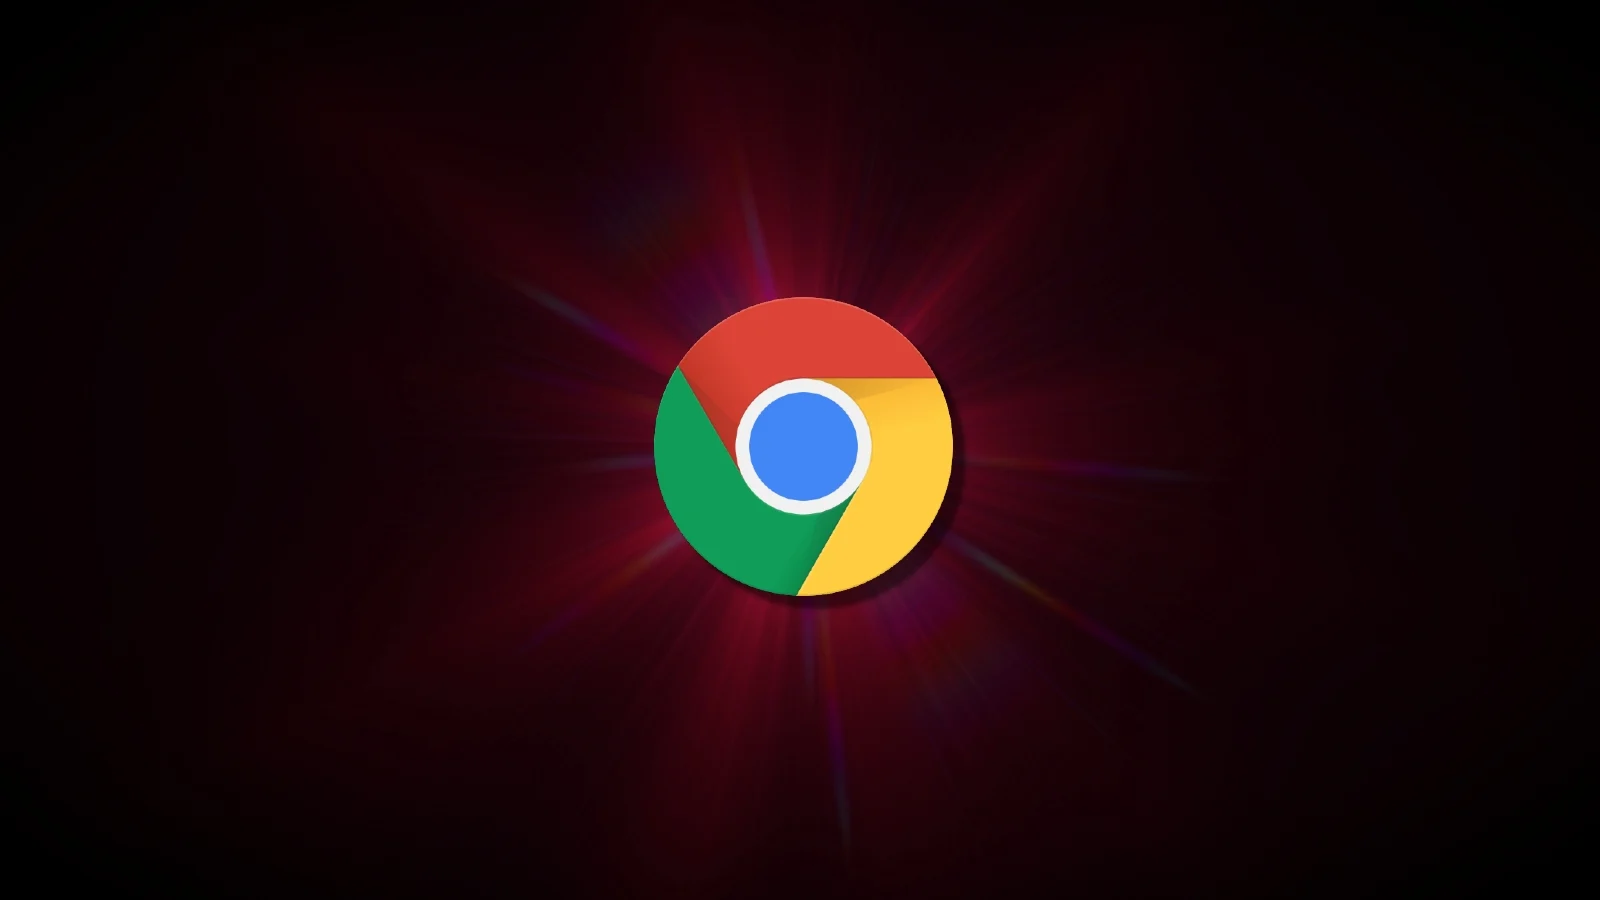 Ignore These Fake Chrome Errors That Ask You to Install Malware